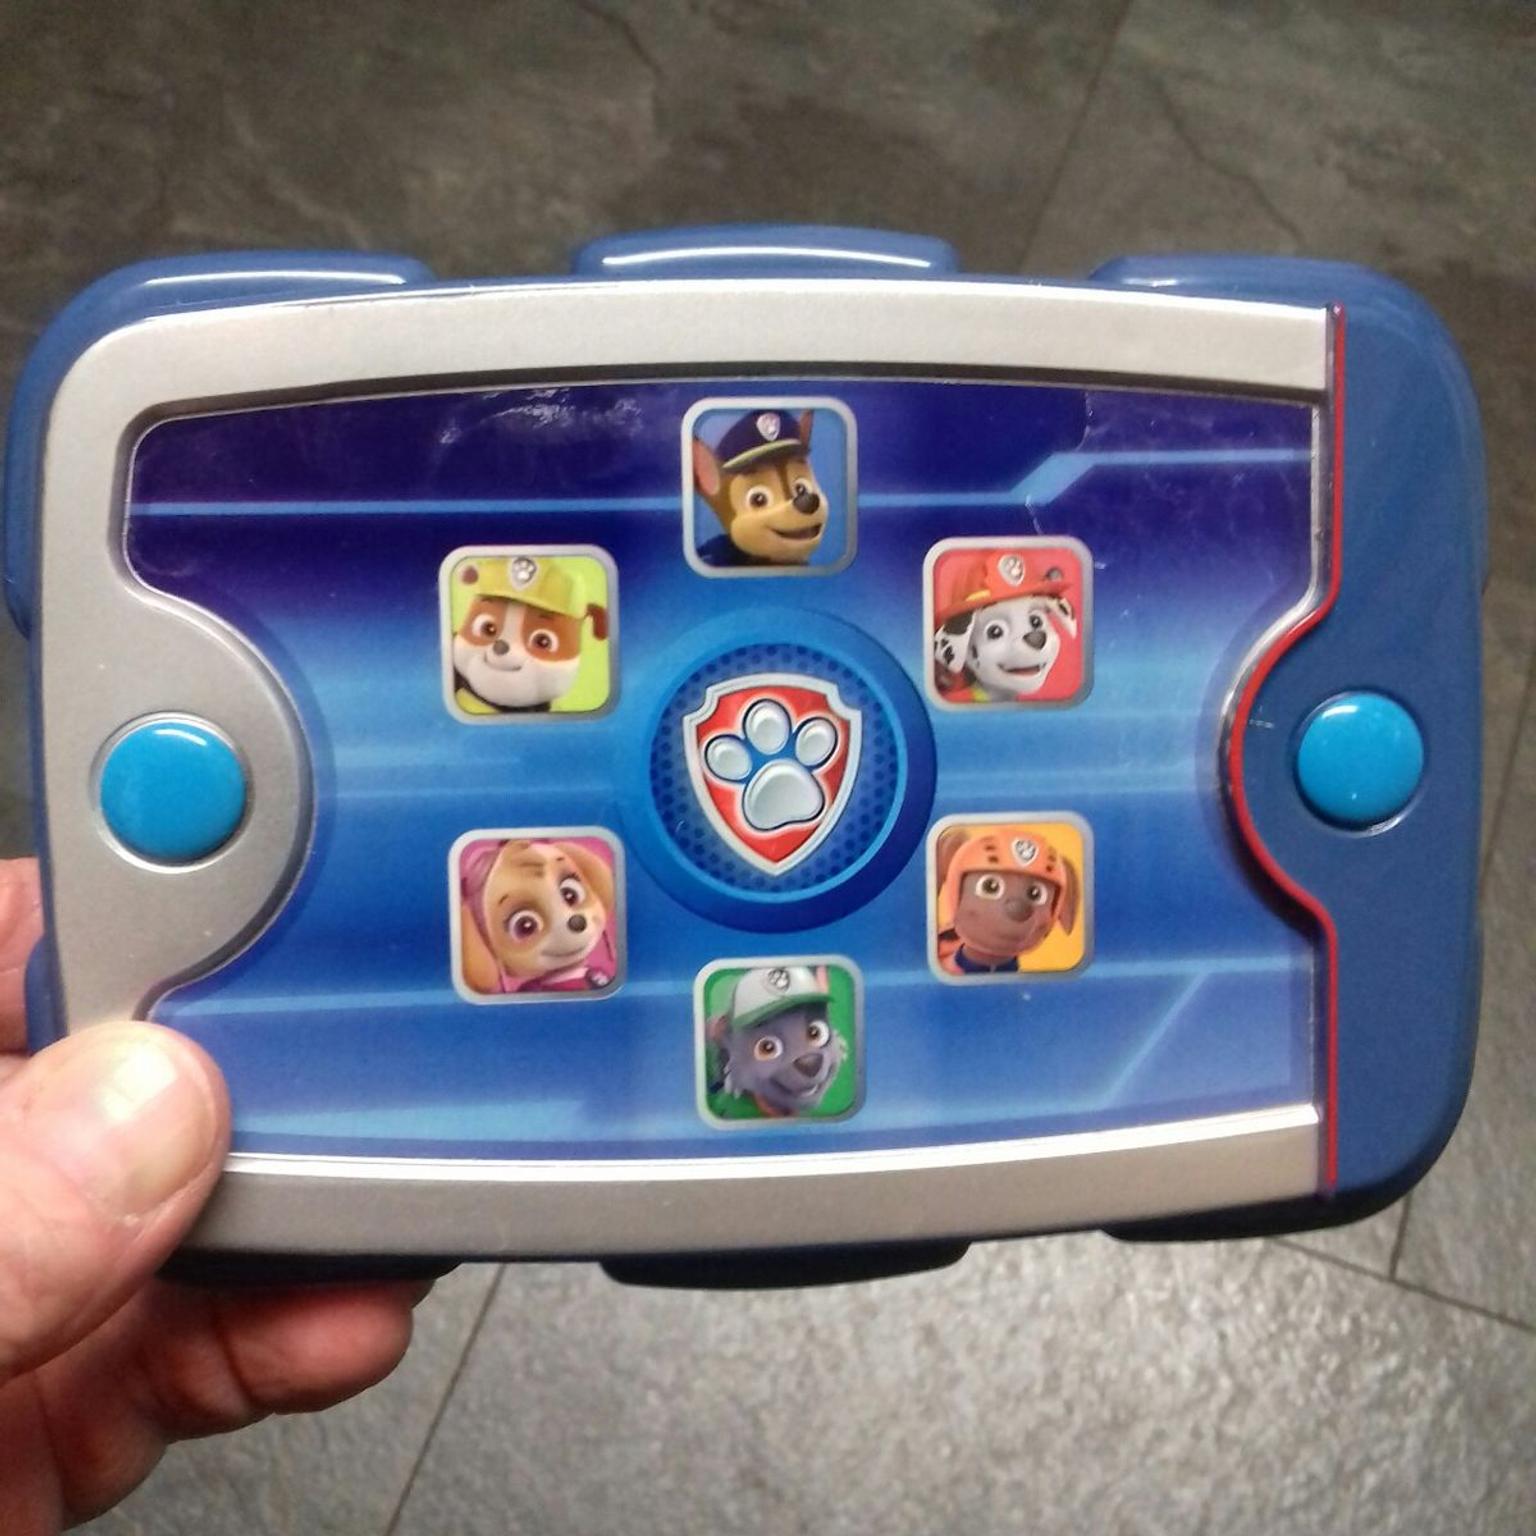 PAW PATROL RYDERS PUP PAD in PR5 Ribble for £2.00 for sale Shpock